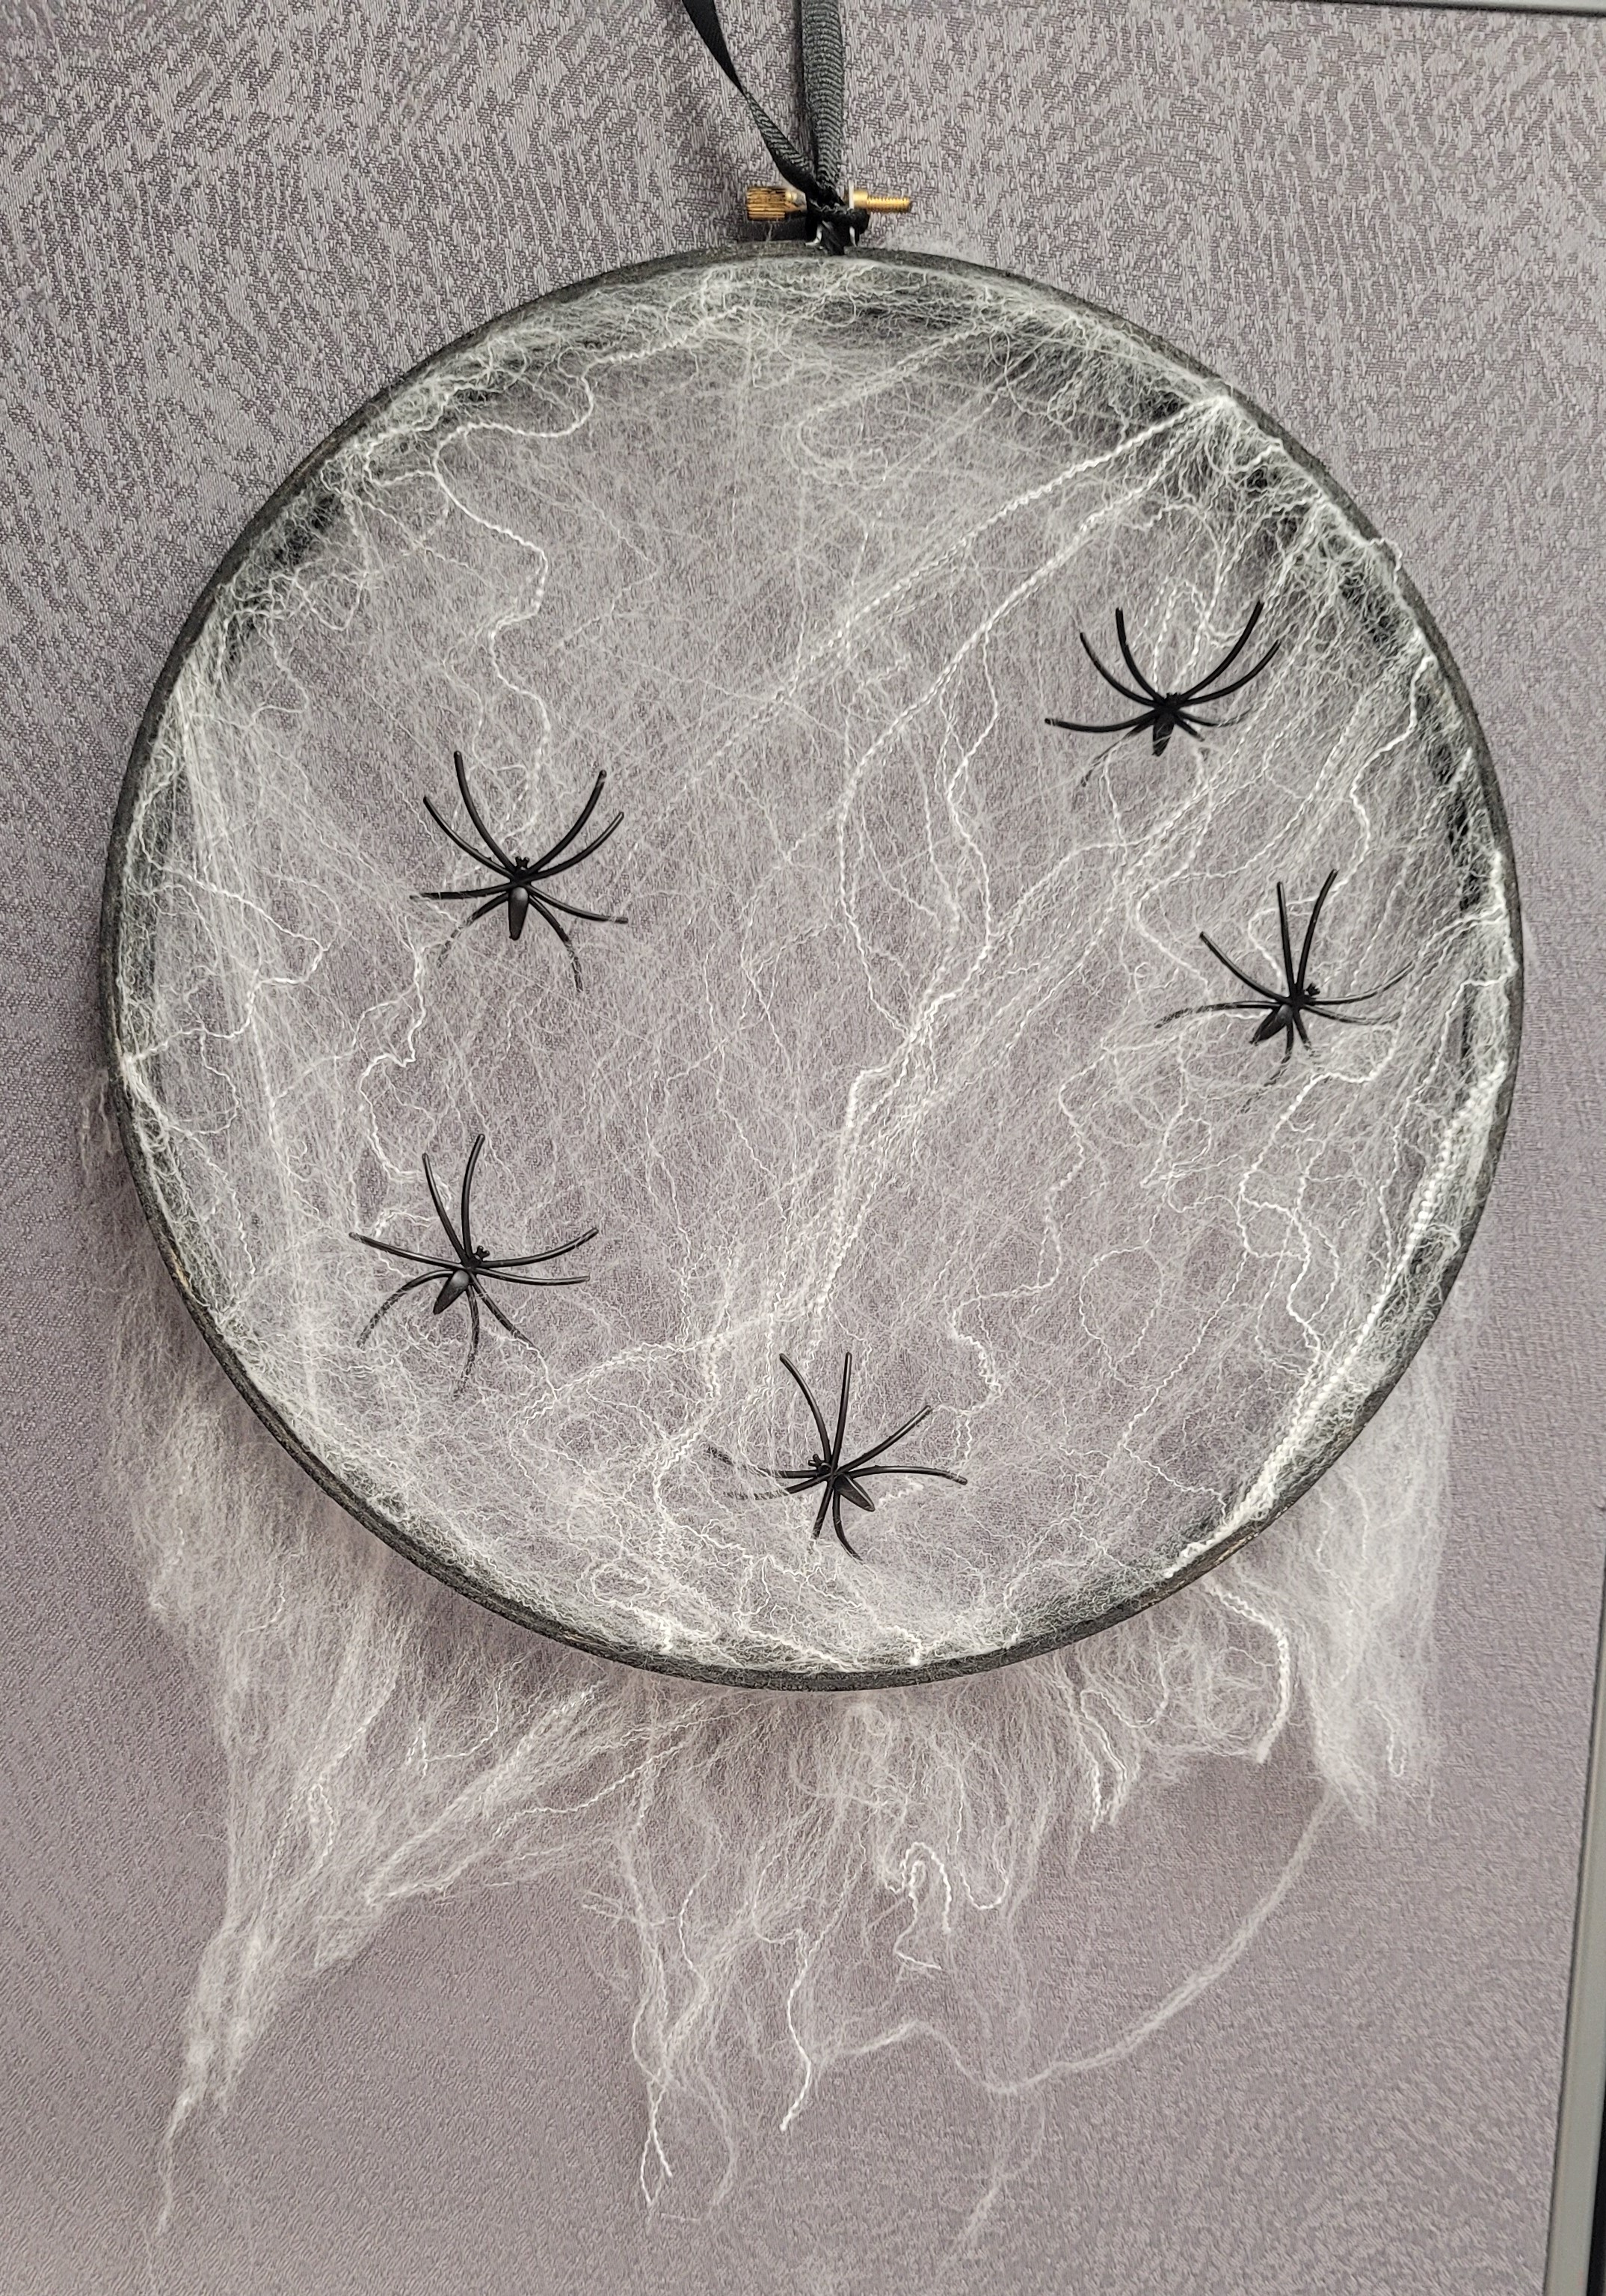 Wreath with cobwebs and spiders